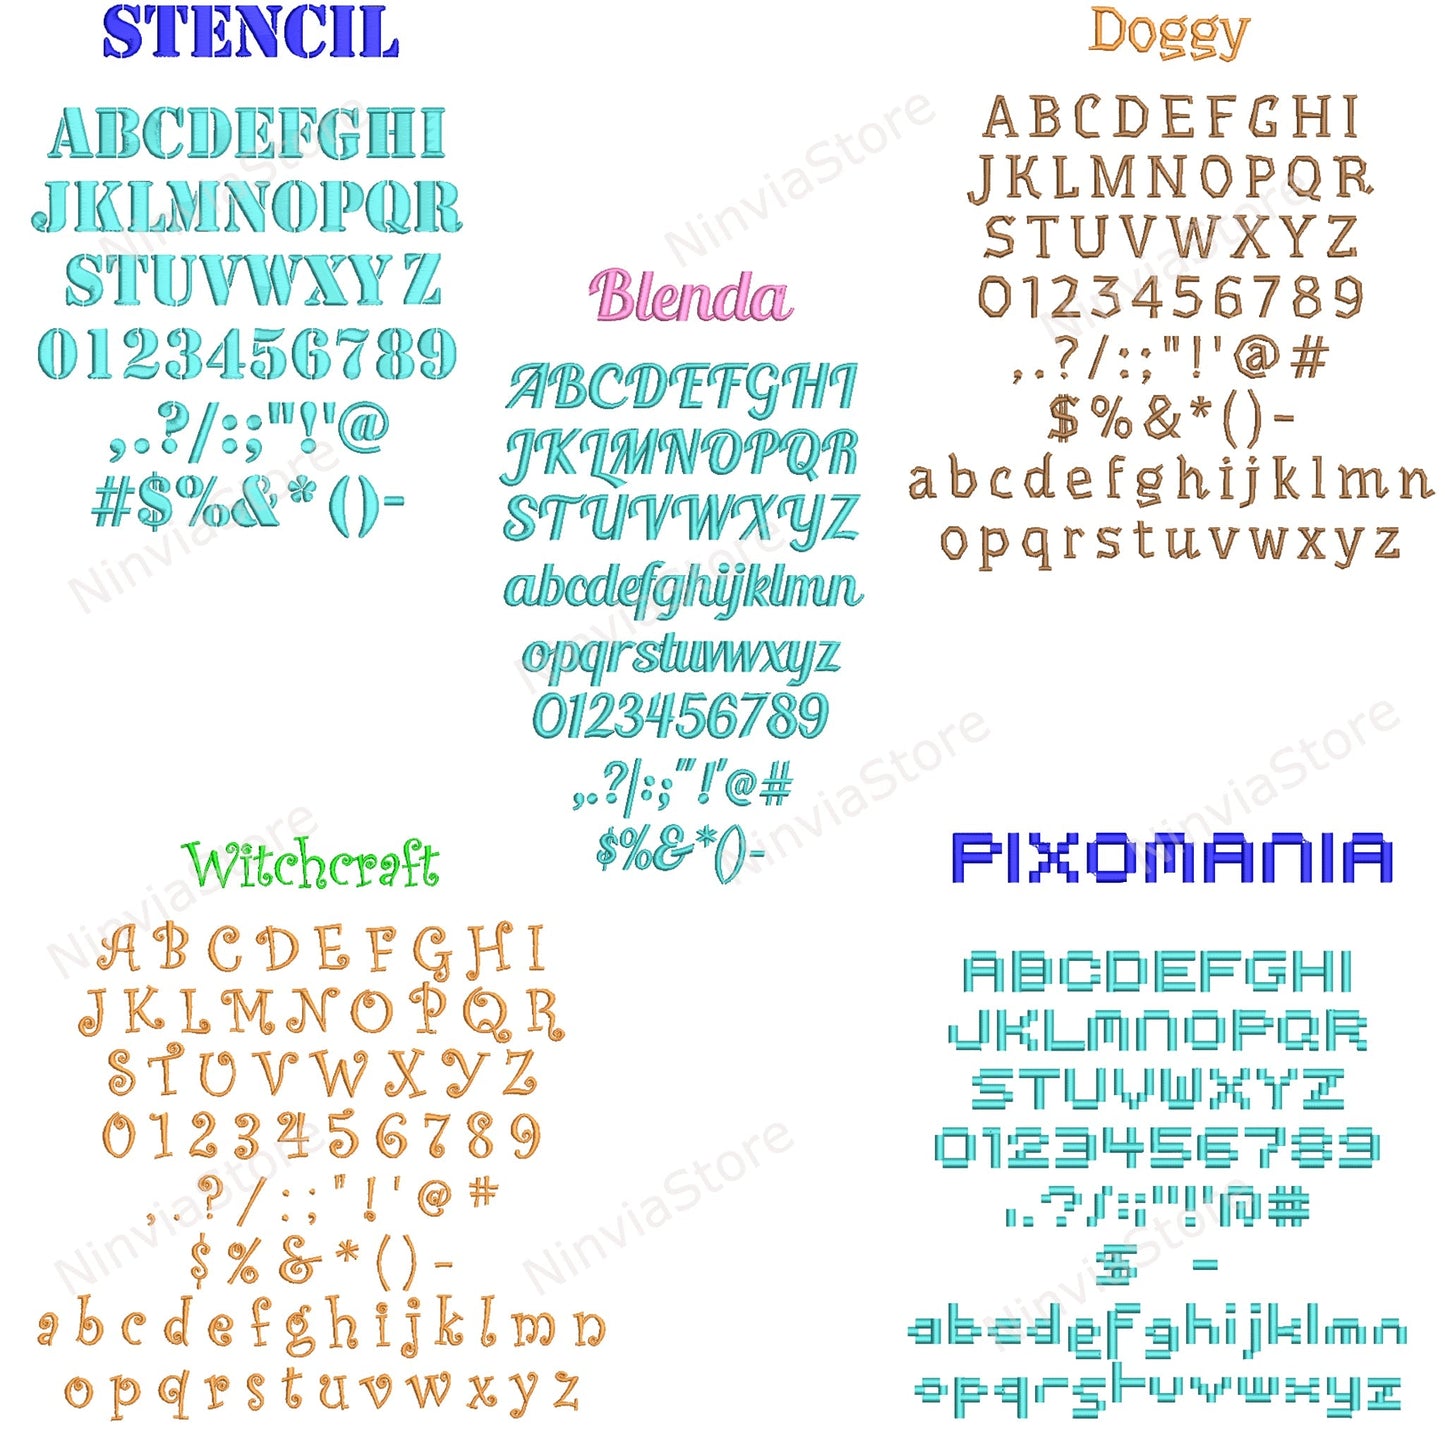 50 PES Embroidery Fonts 1", 1.5" and 2" Size, Machine Embroidery Font pe, Alphabet Embroidery Design, pe font for Embroidery, Small Size Font